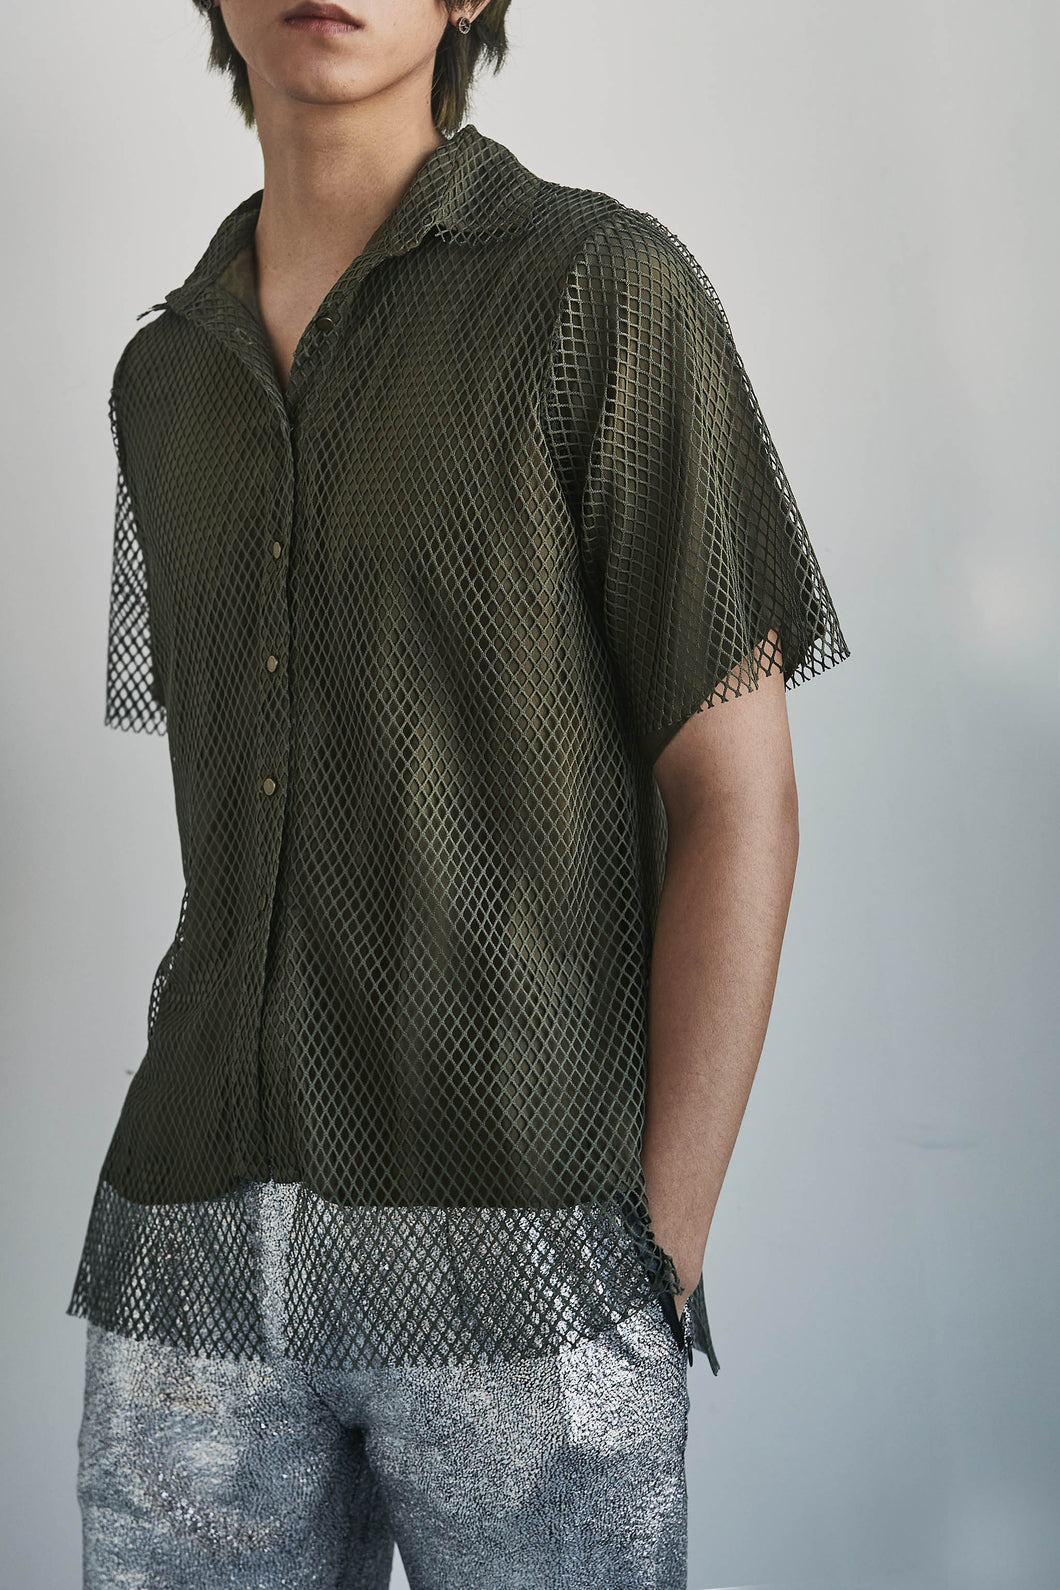 Olive Net x Cupro Shirt - Made to order